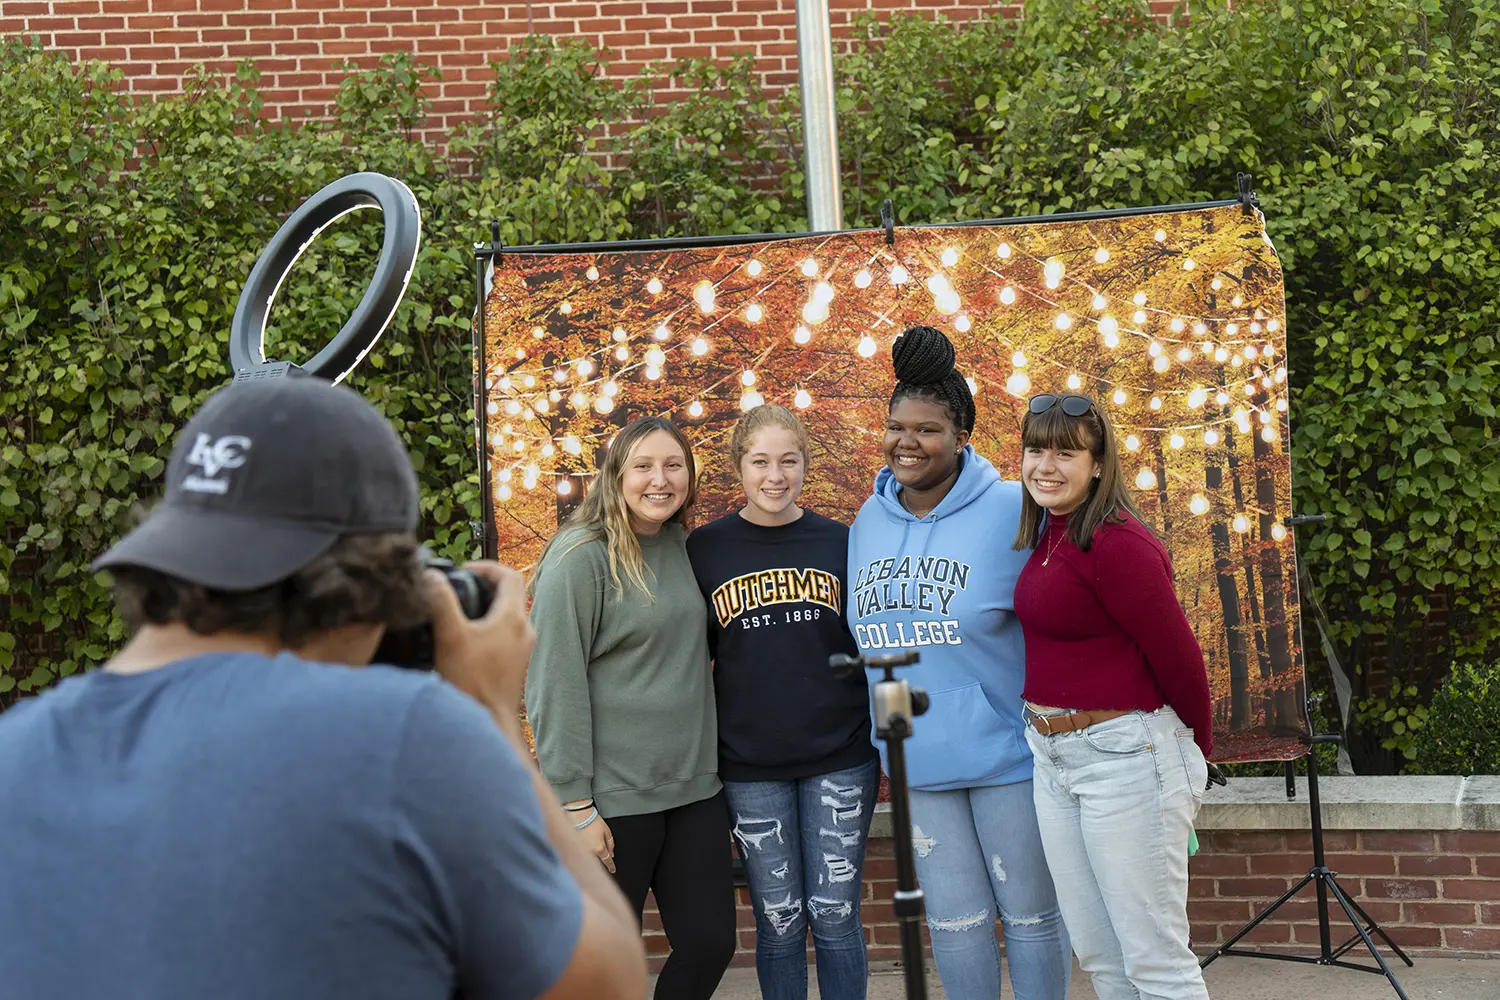 Lebanon Valley College students pose at fall fest photo booth